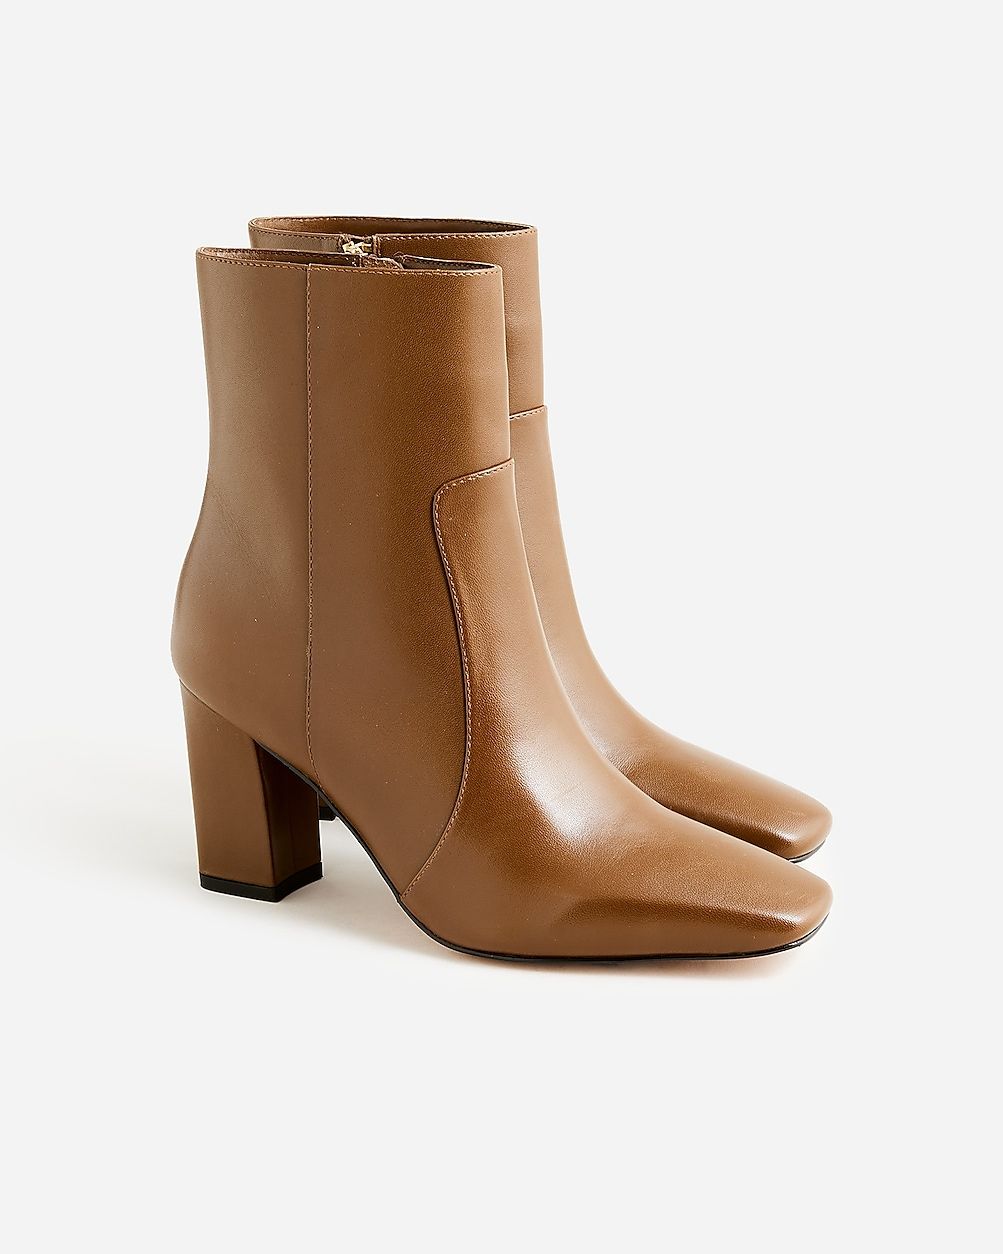 Almond-toe ankle boots in leather | J.Crew US